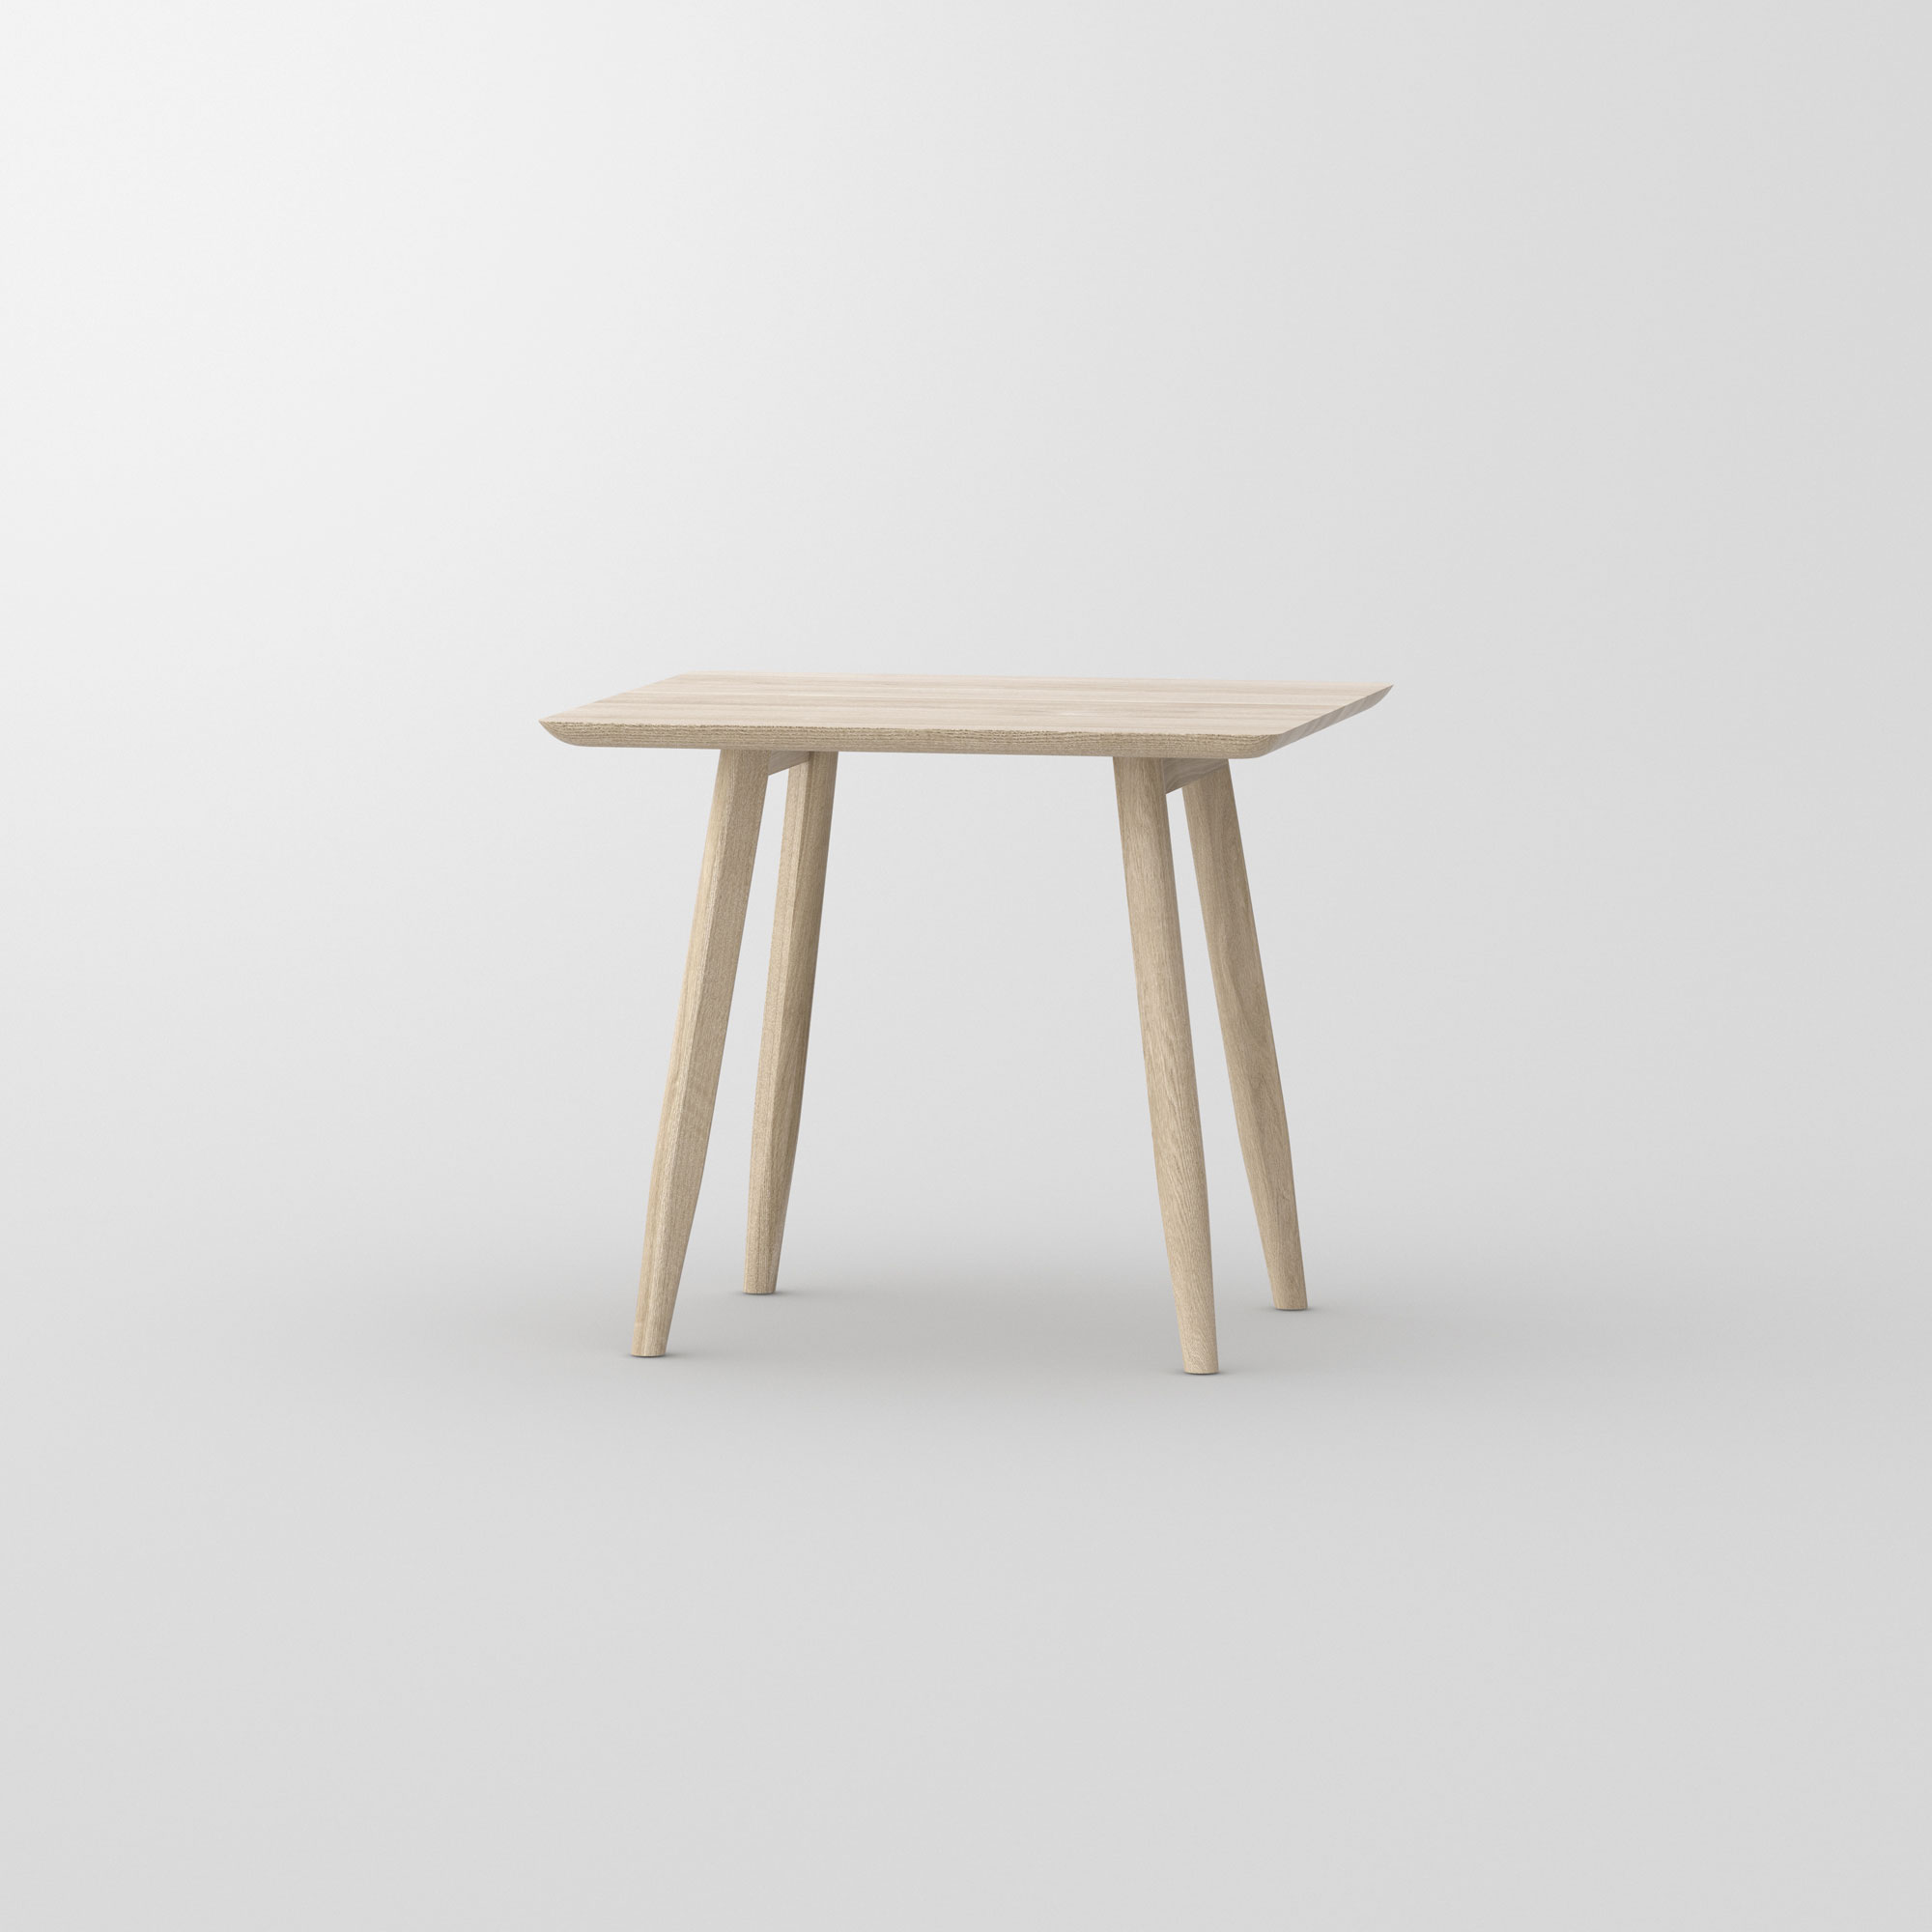 Designer Dining Table Wood AETAS BASIC 3 cam2 custom made in solid wood by vitamin design